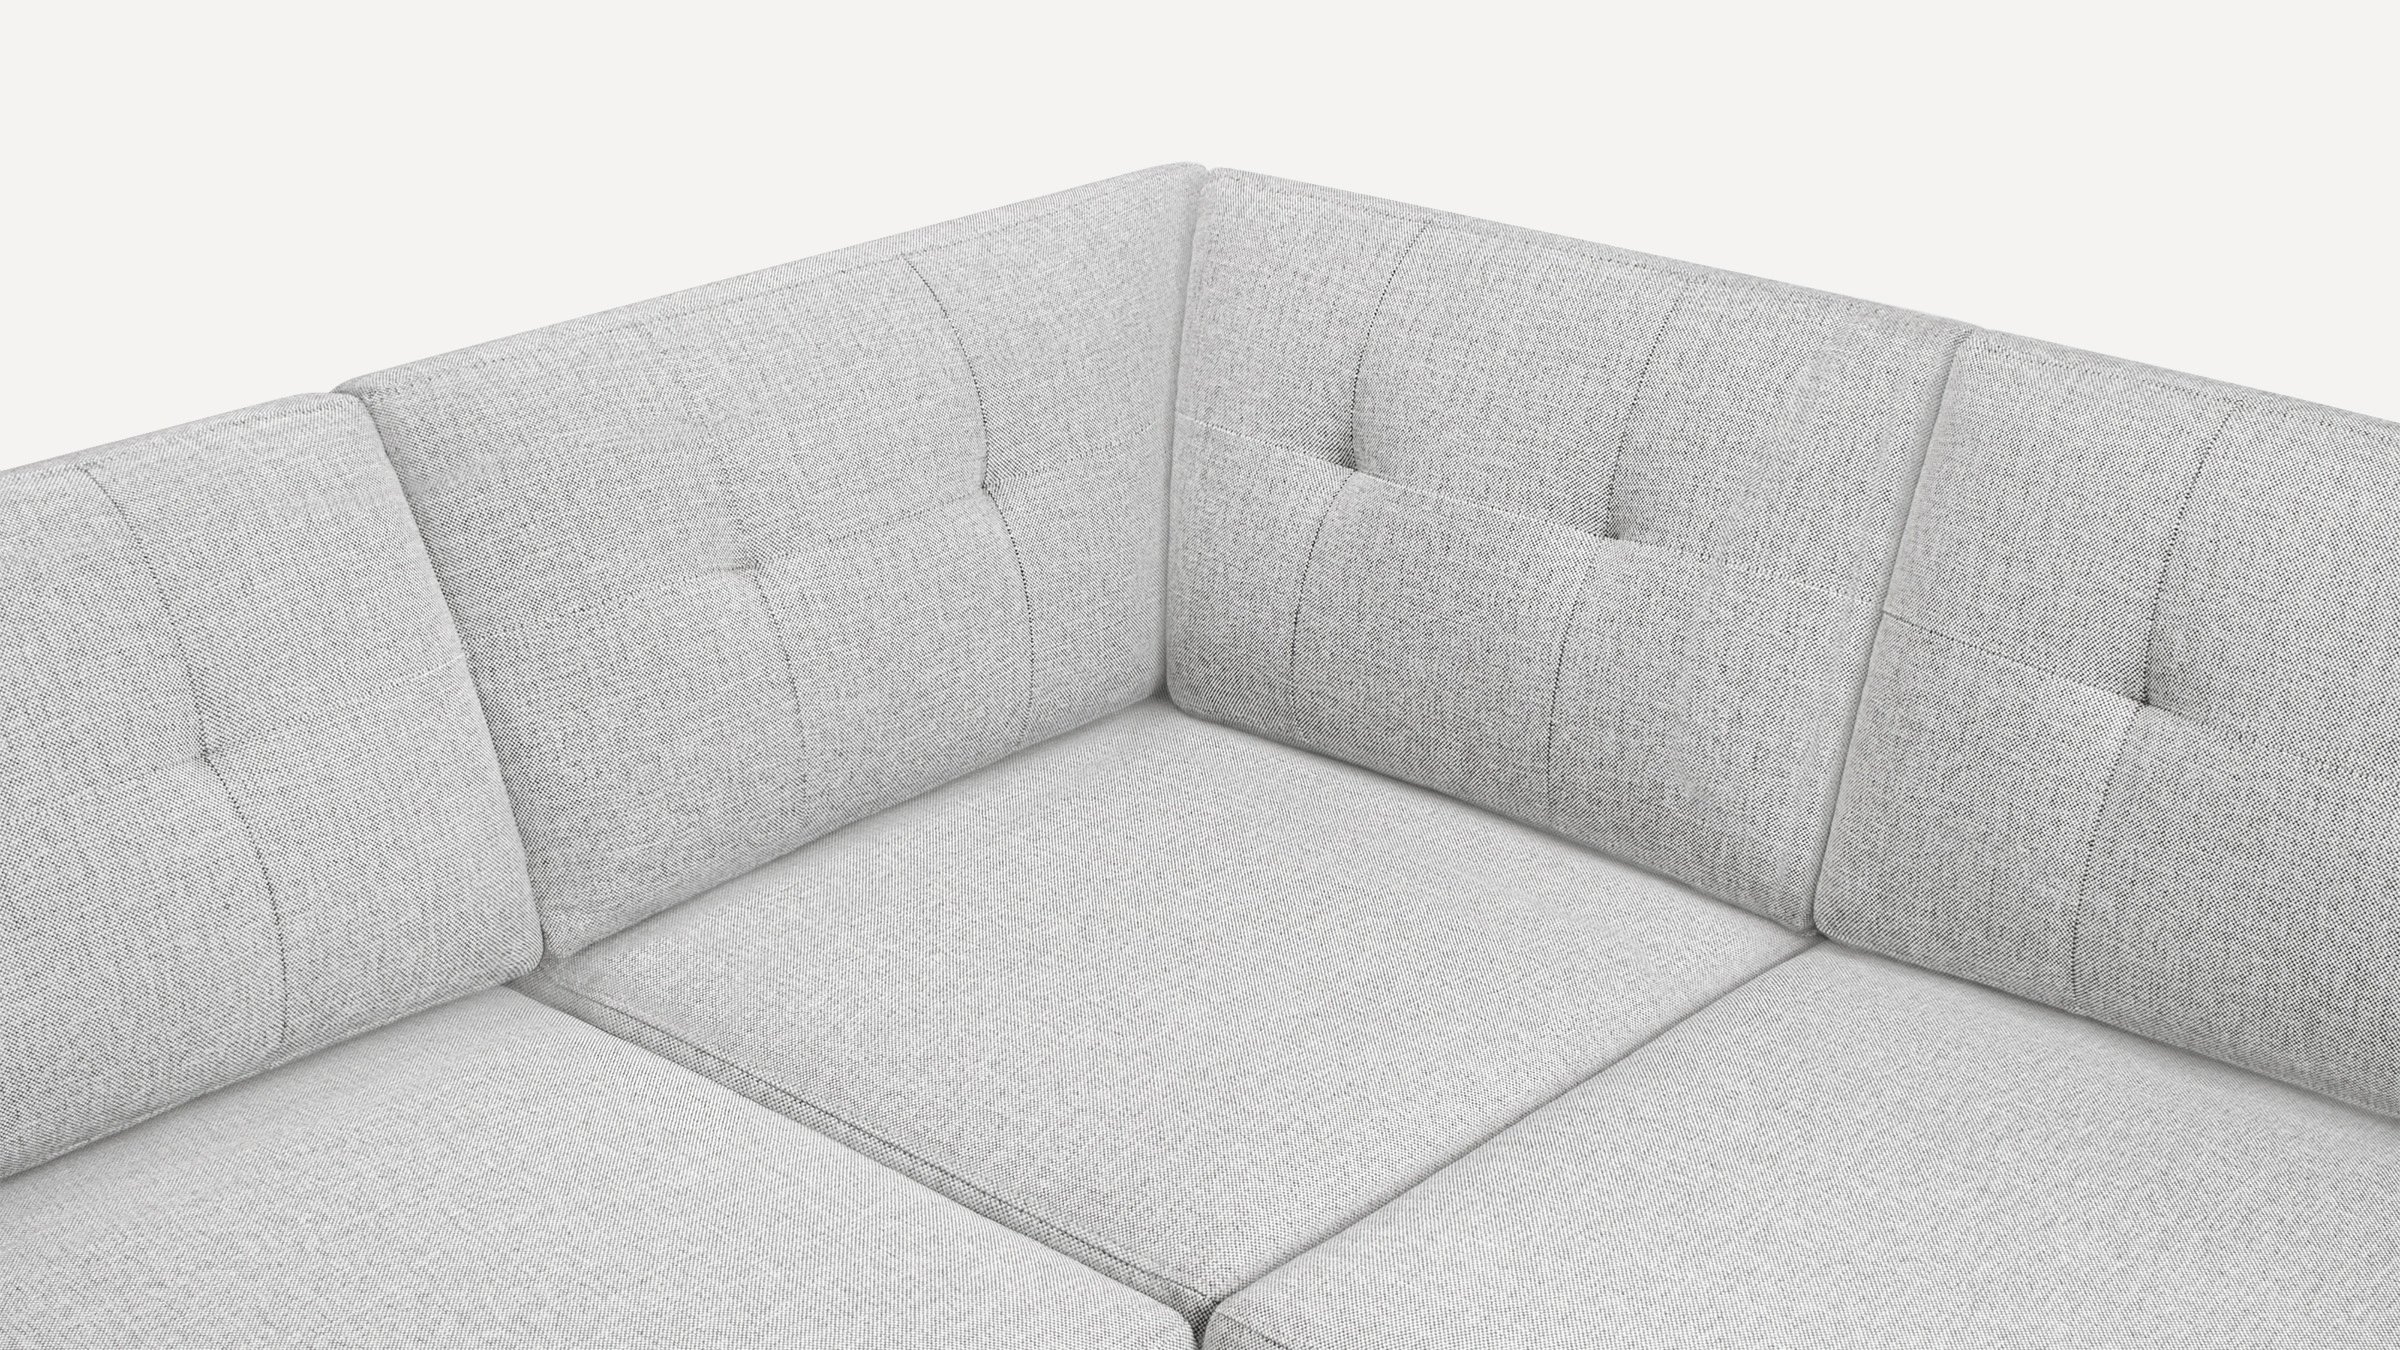 Nomad 5-Seat Corner Sectional in Crushed Gravel - Image 2